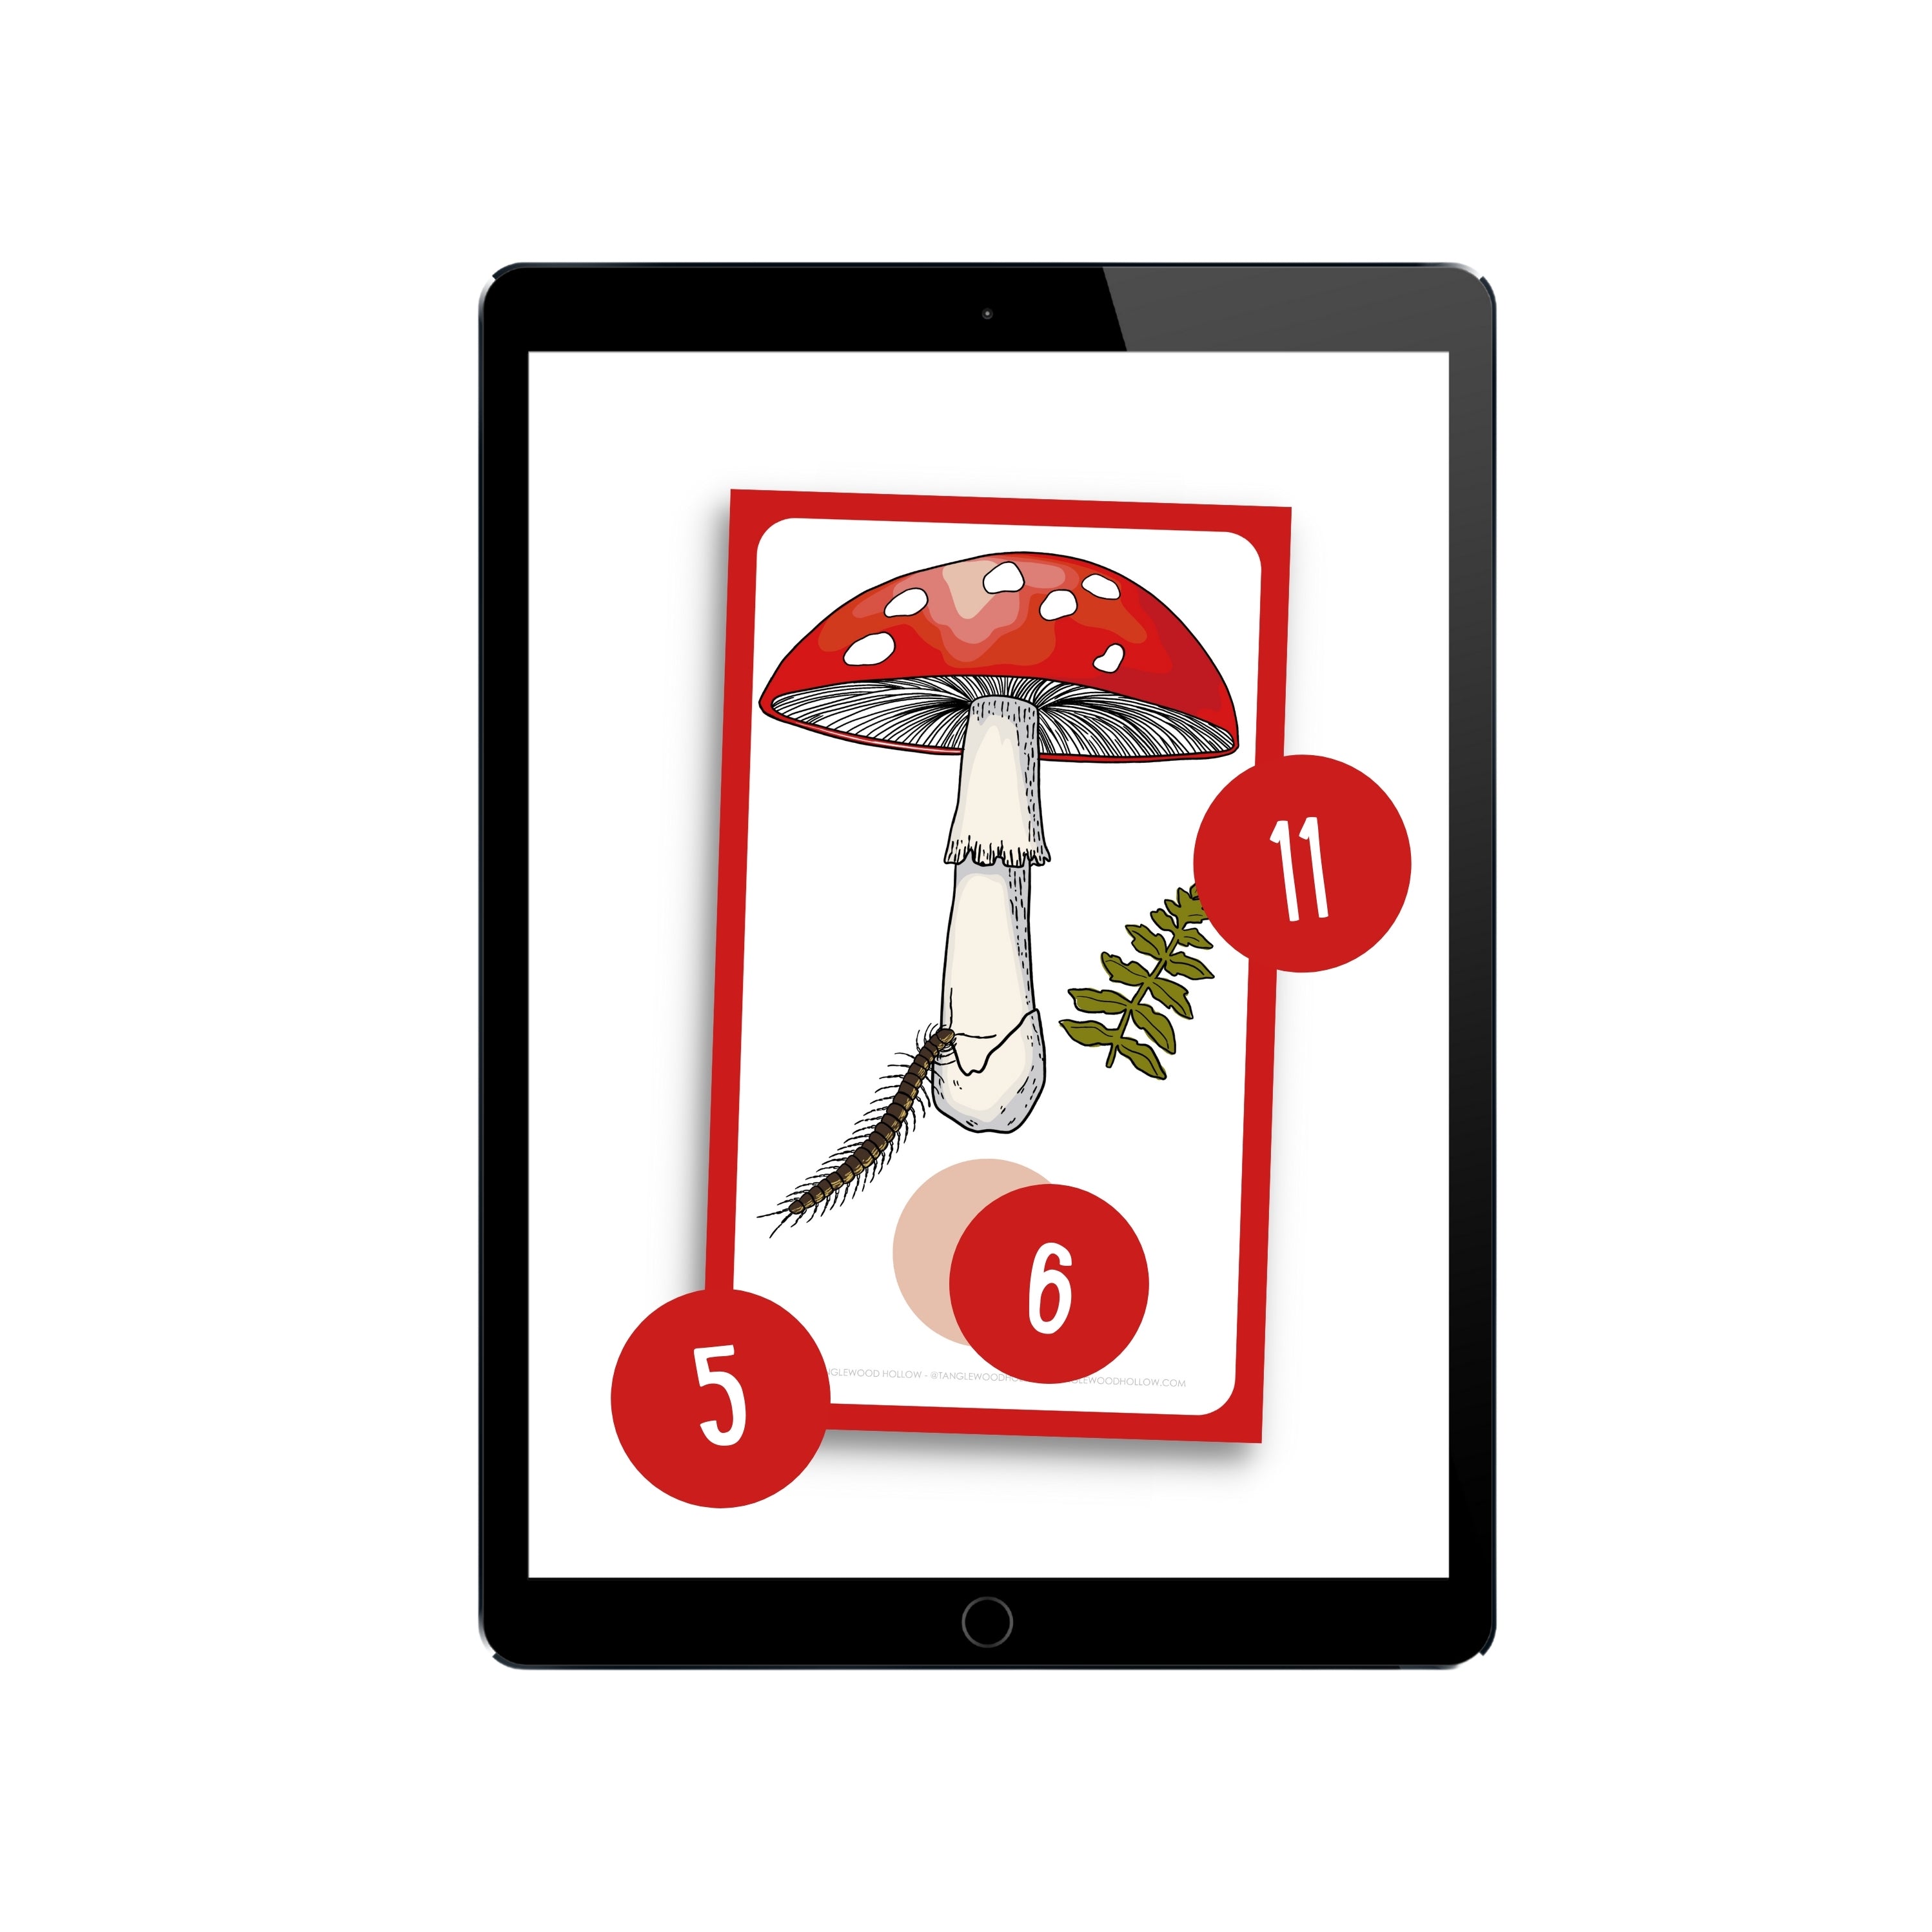 Digital Toadstool Counting Activity